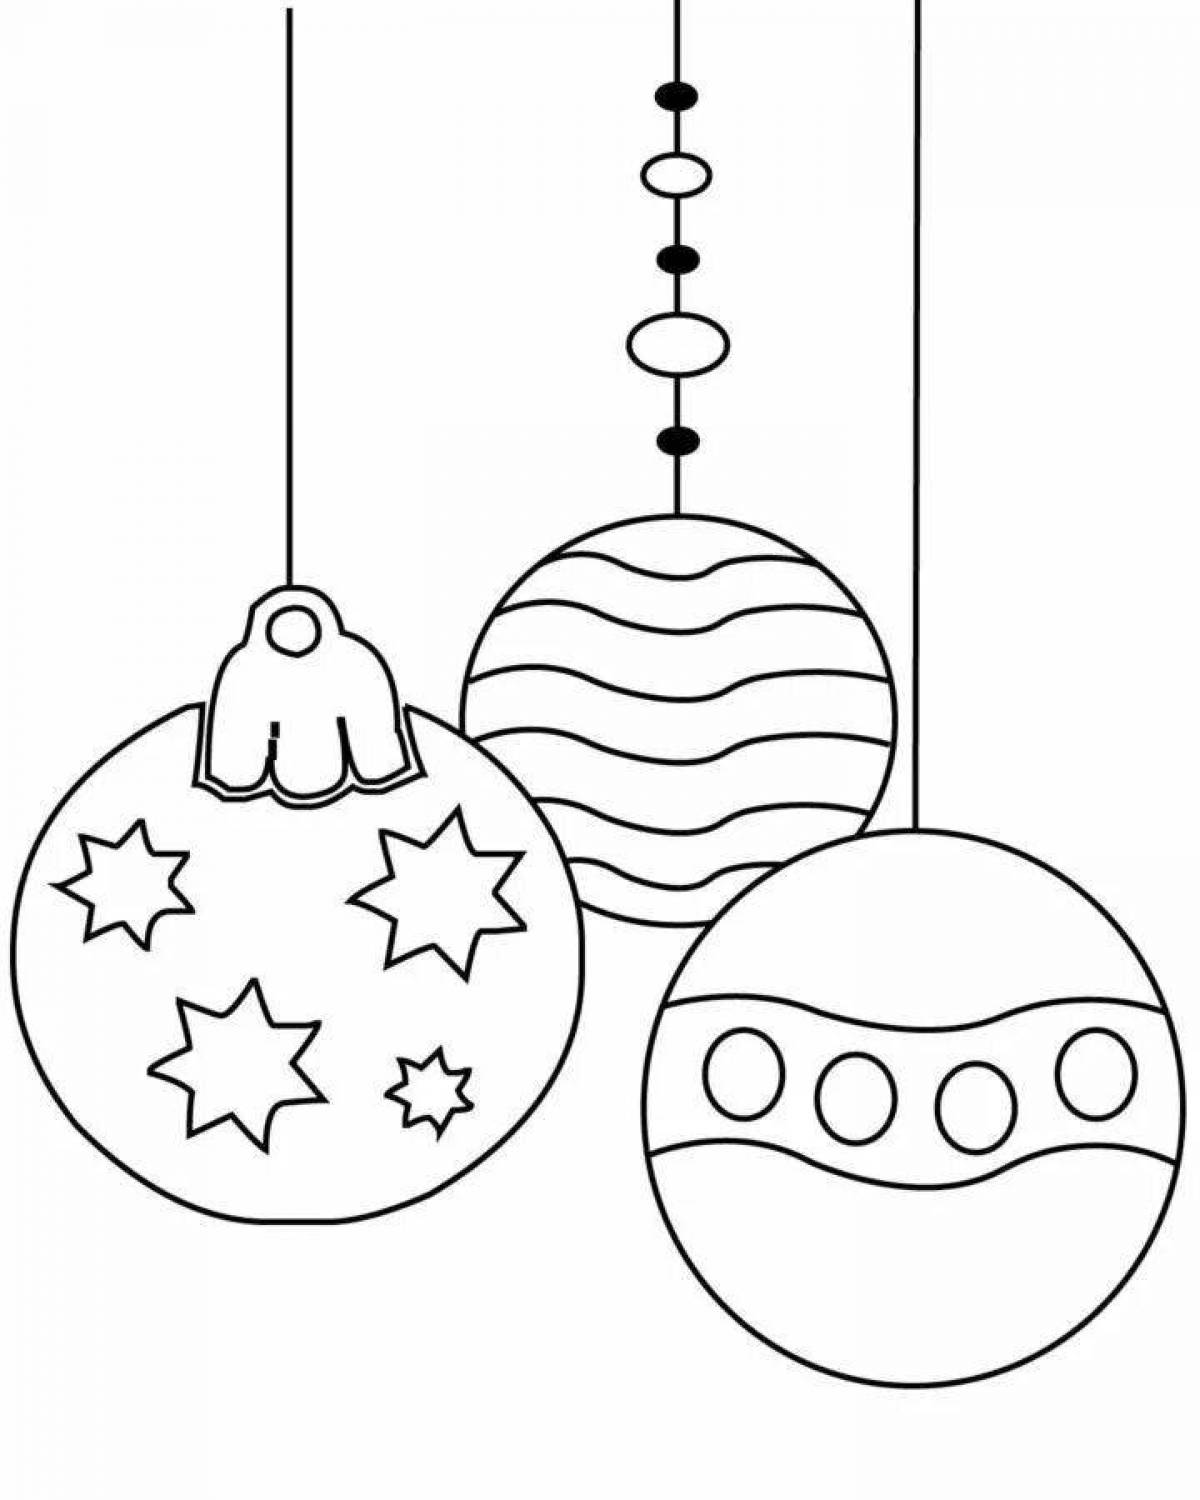 Fancy Christmas toys coloring book